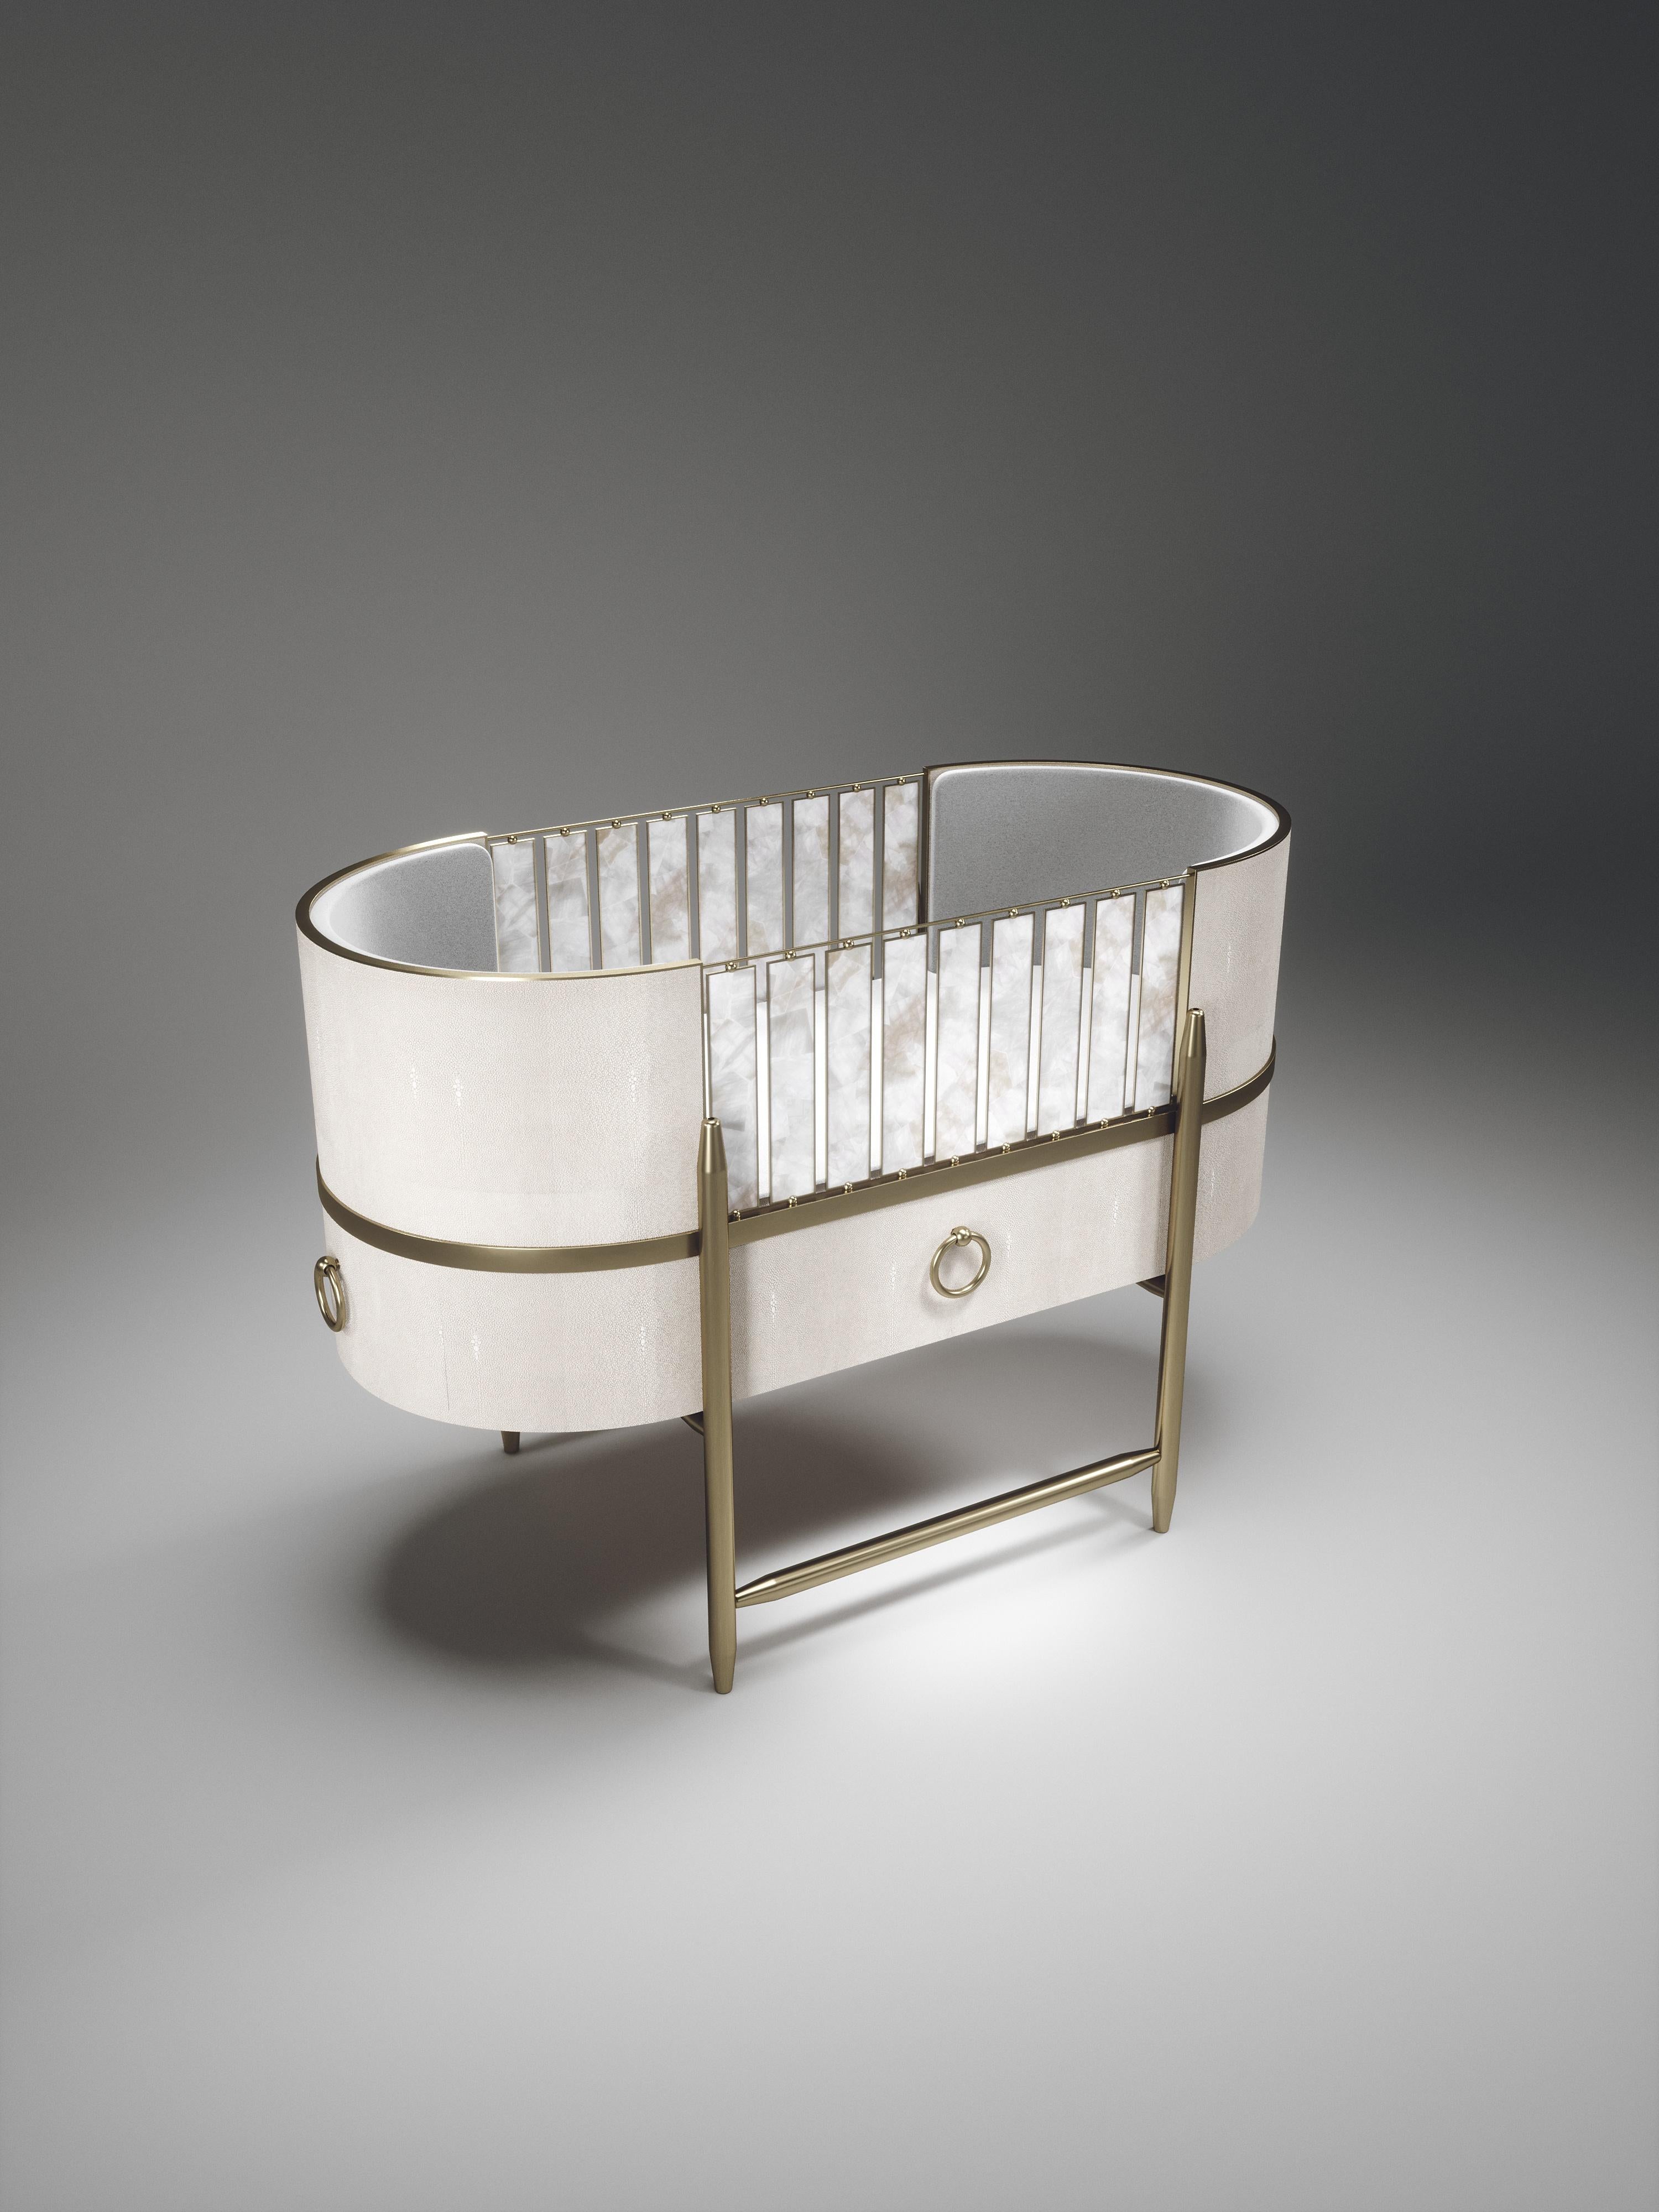 The Chabanais Baby Crib by Kifu Paris is the ultimate luxury piece for your child's bedroom. Inspired by the birth of her first child, Kifu Augousti designed this piece to embrace the whimsical world of a child. The piece is inlaid in cream shagreen